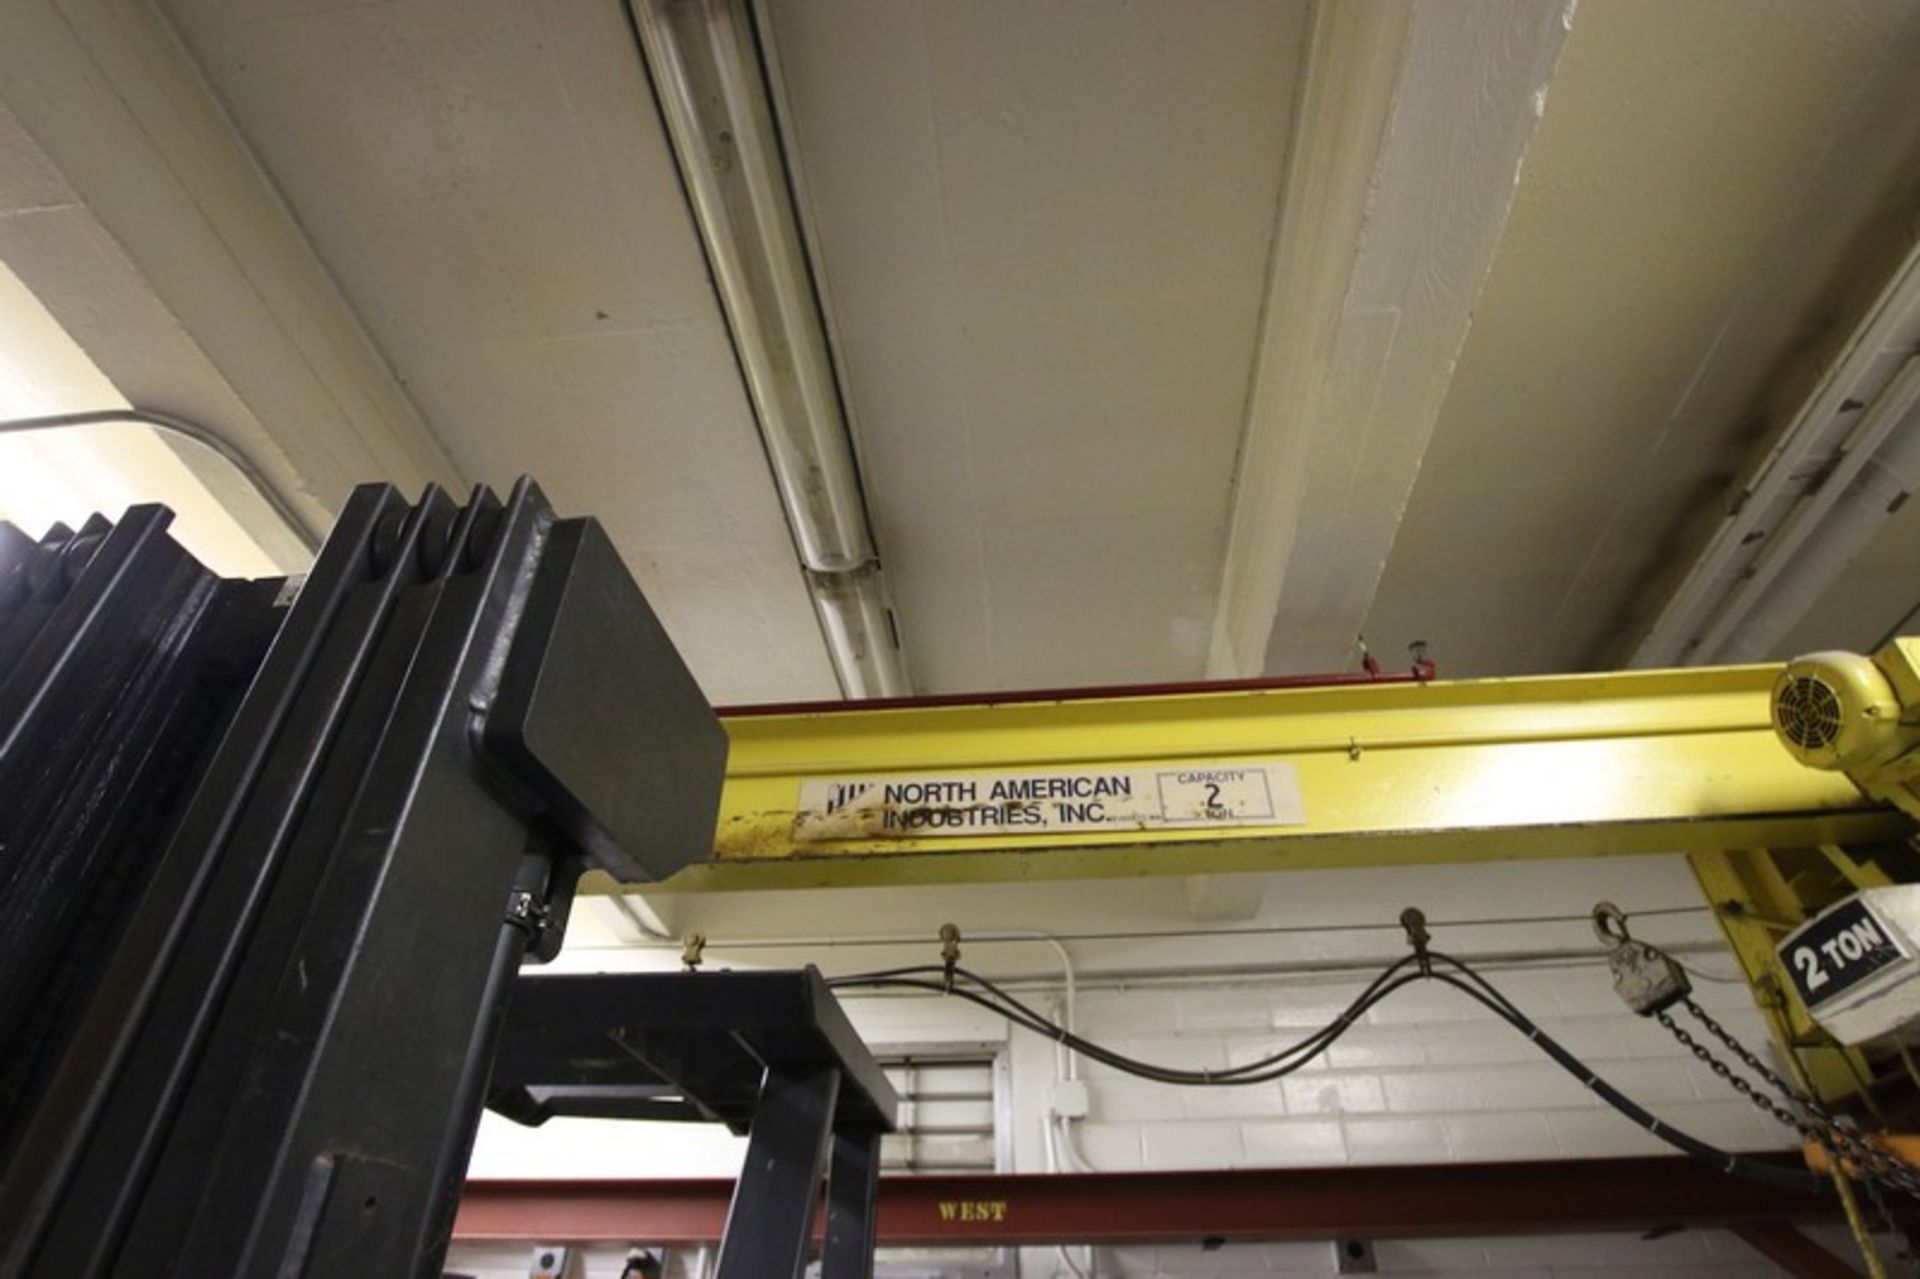 North American Industries Inc. 2-Ton Capacity Crane with Coffing Unit - Image 3 of 3